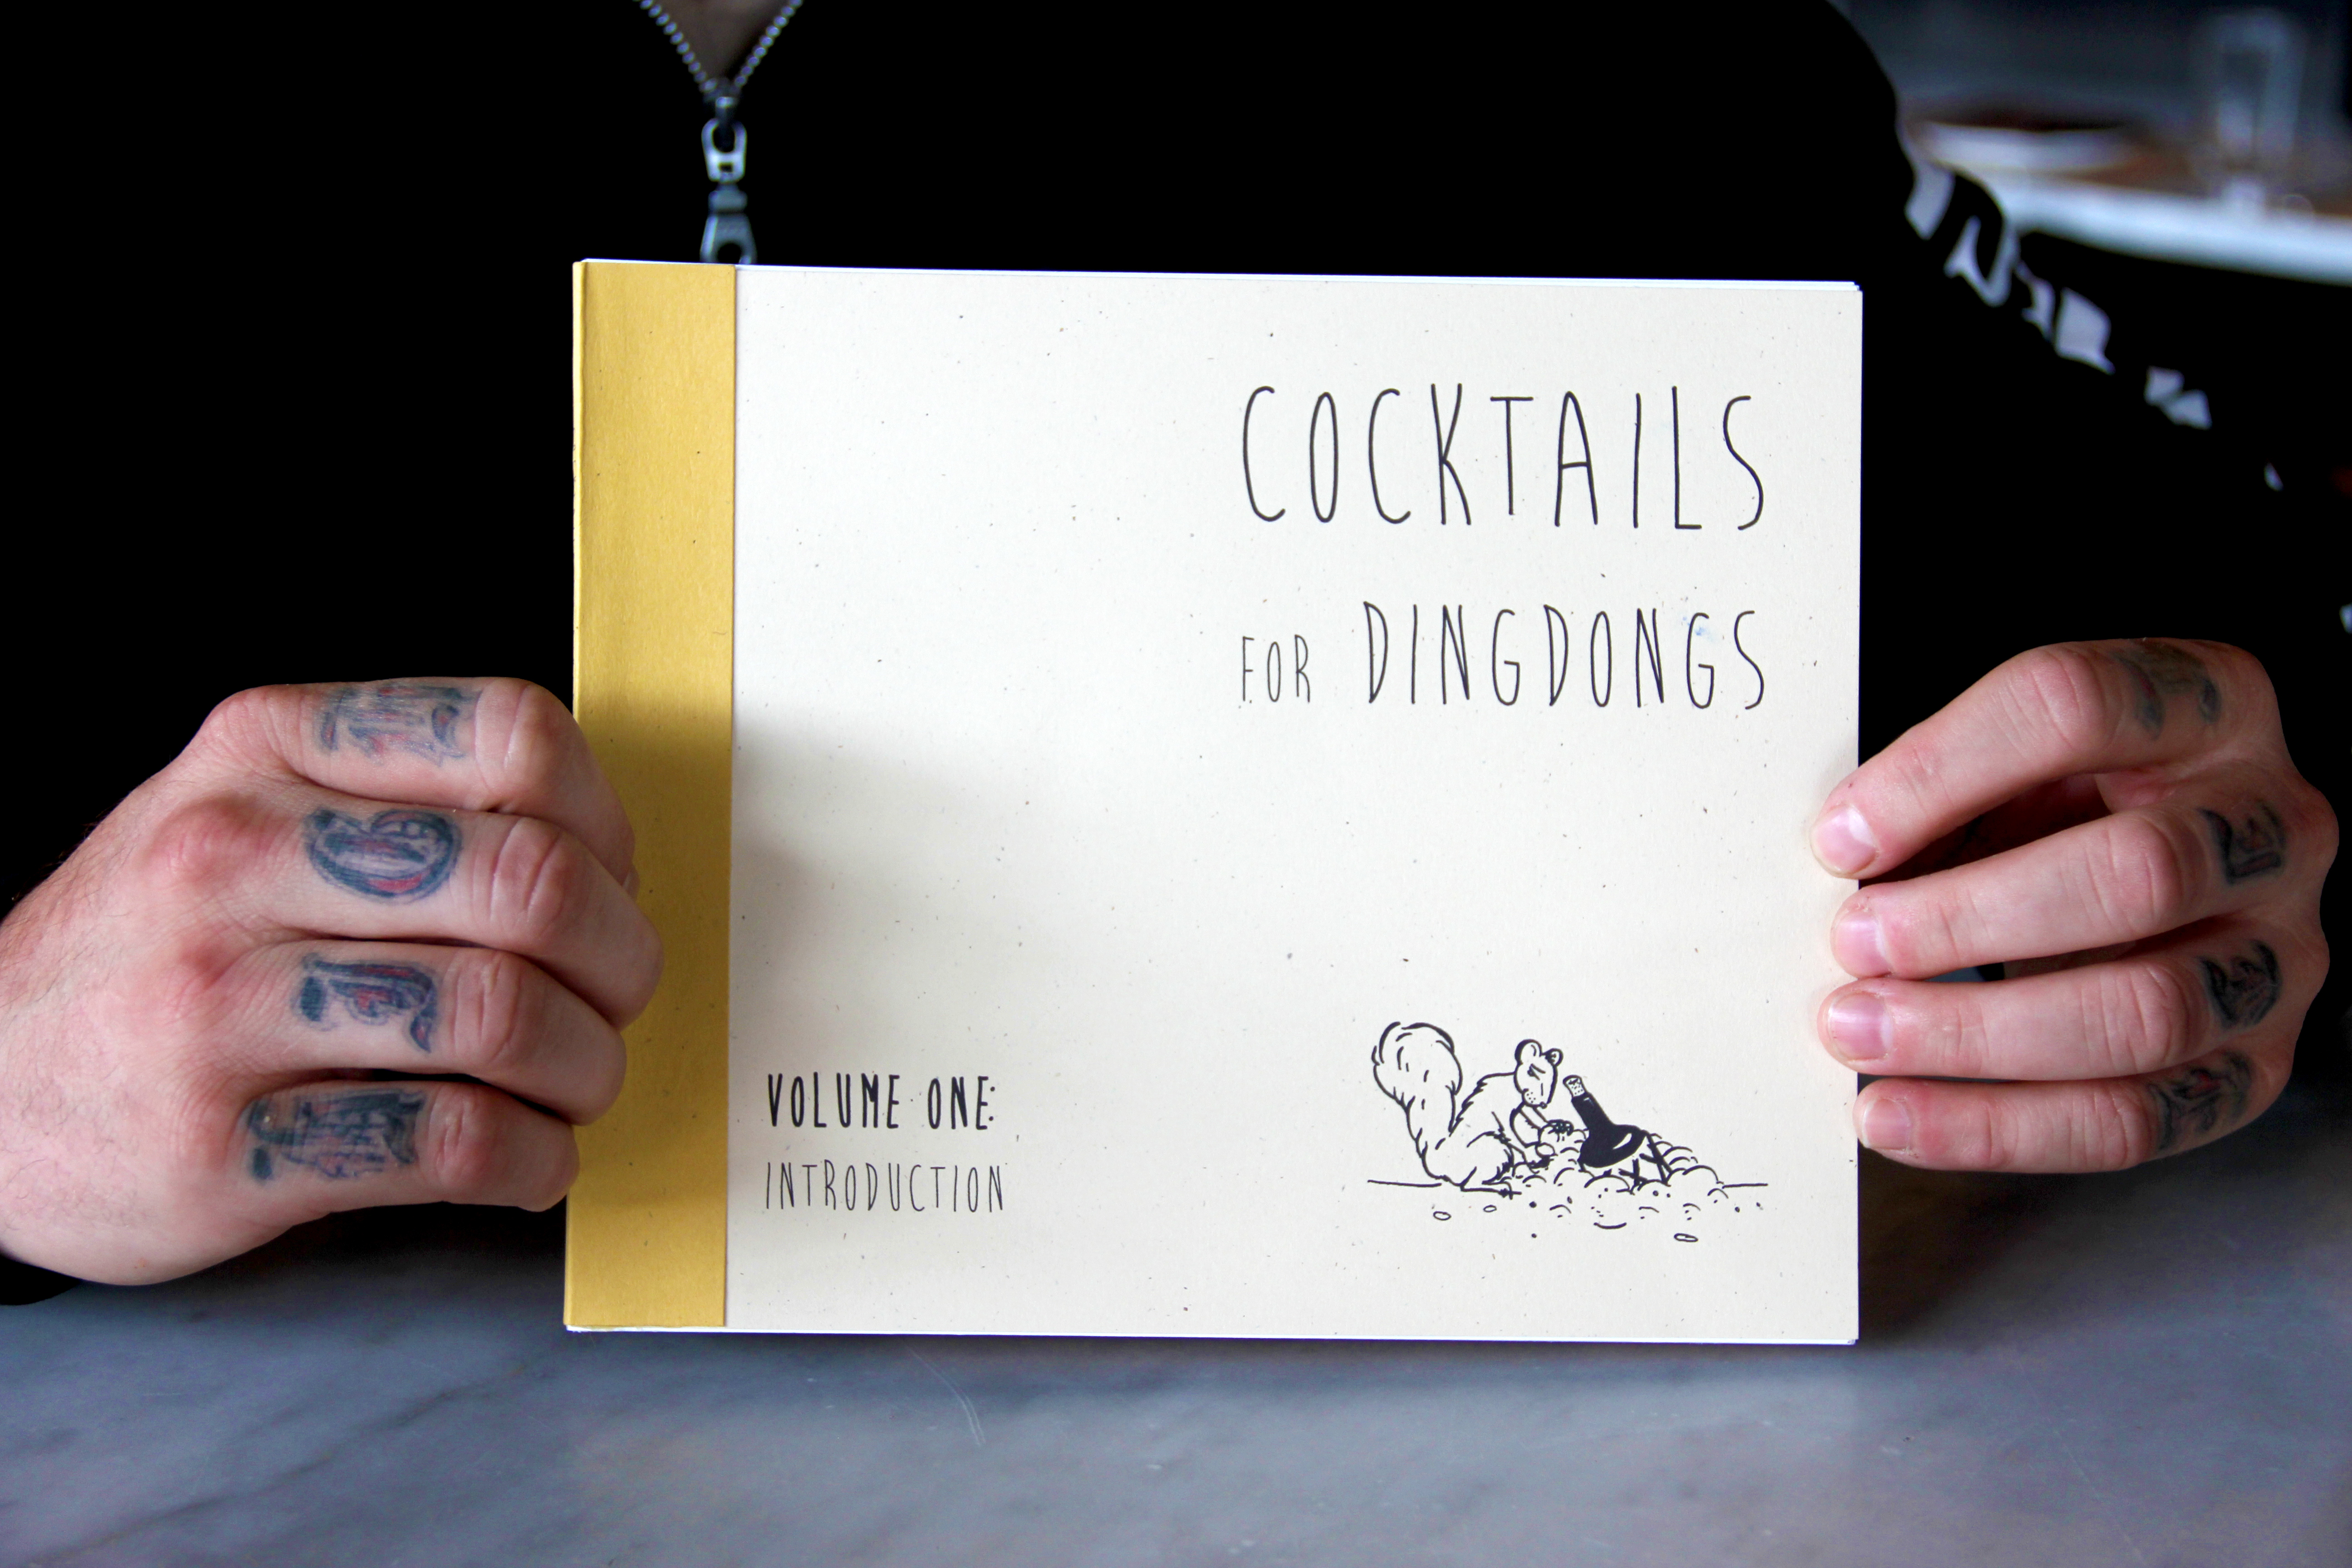 "Cocktails for Dingdongs"